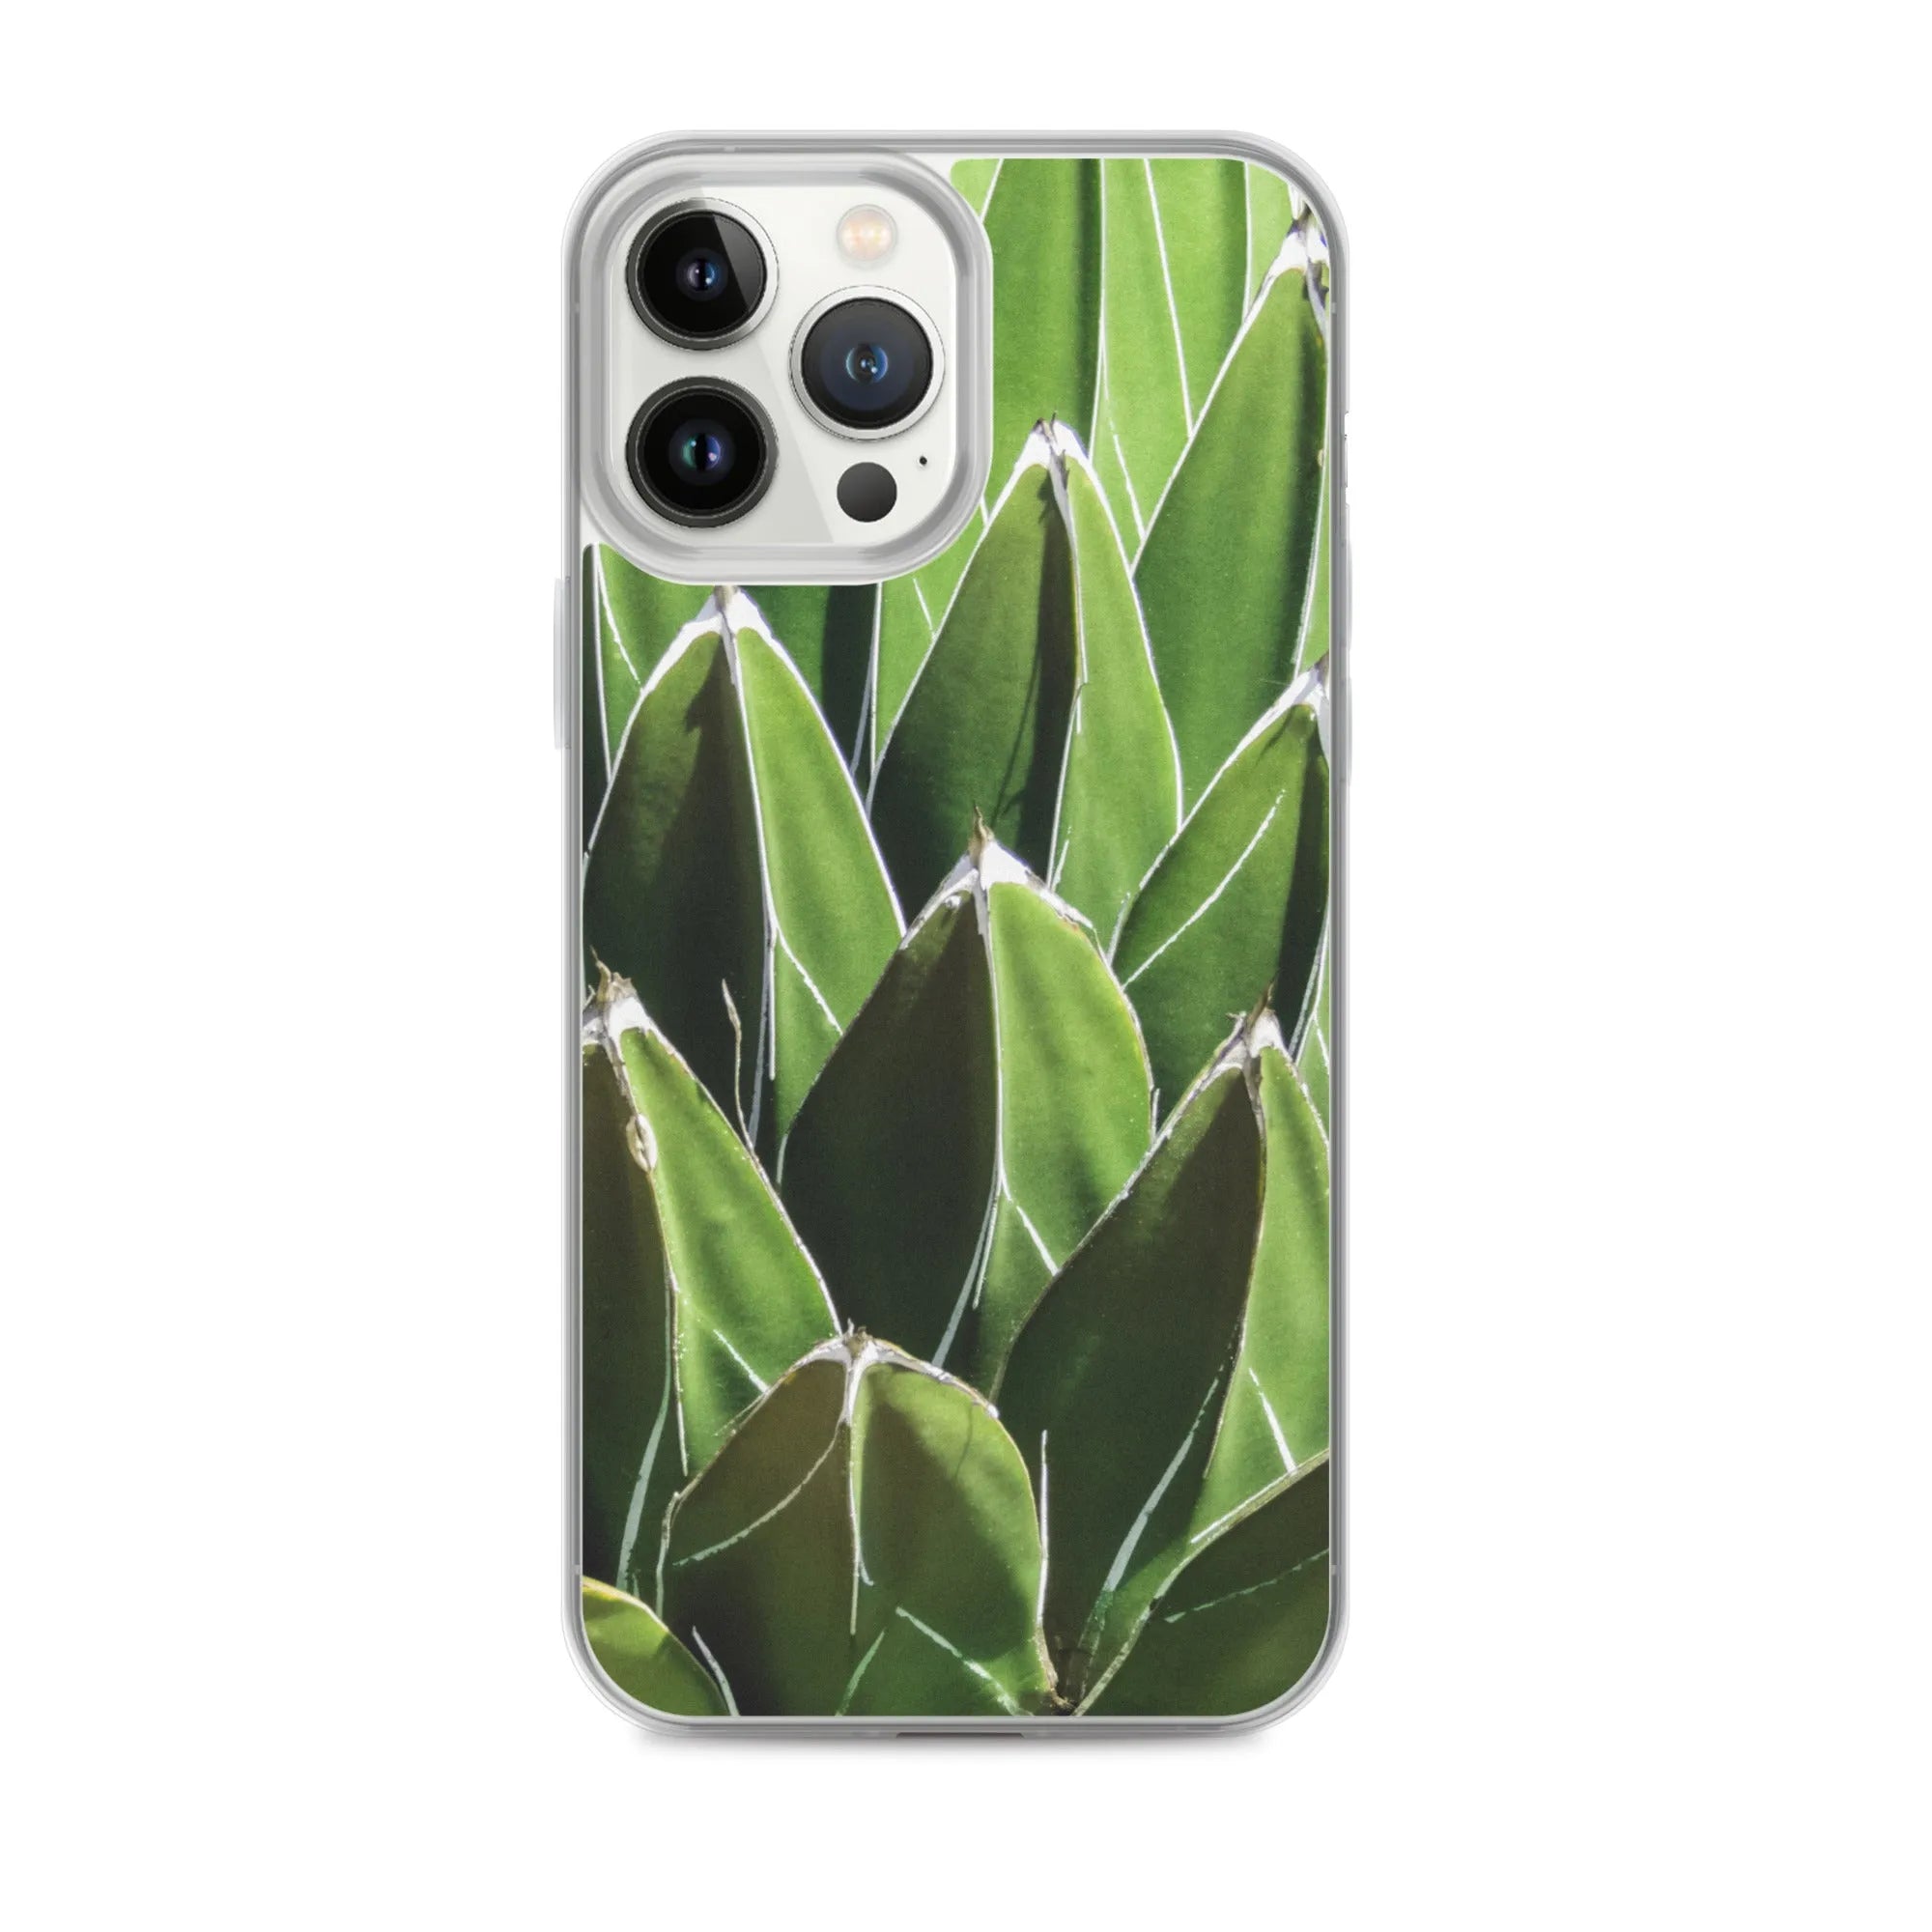 Decked Out Botanical Art Iphone Case - Iphone 13 Pro Max - Mobile Phone Cases - Aesthetic Art